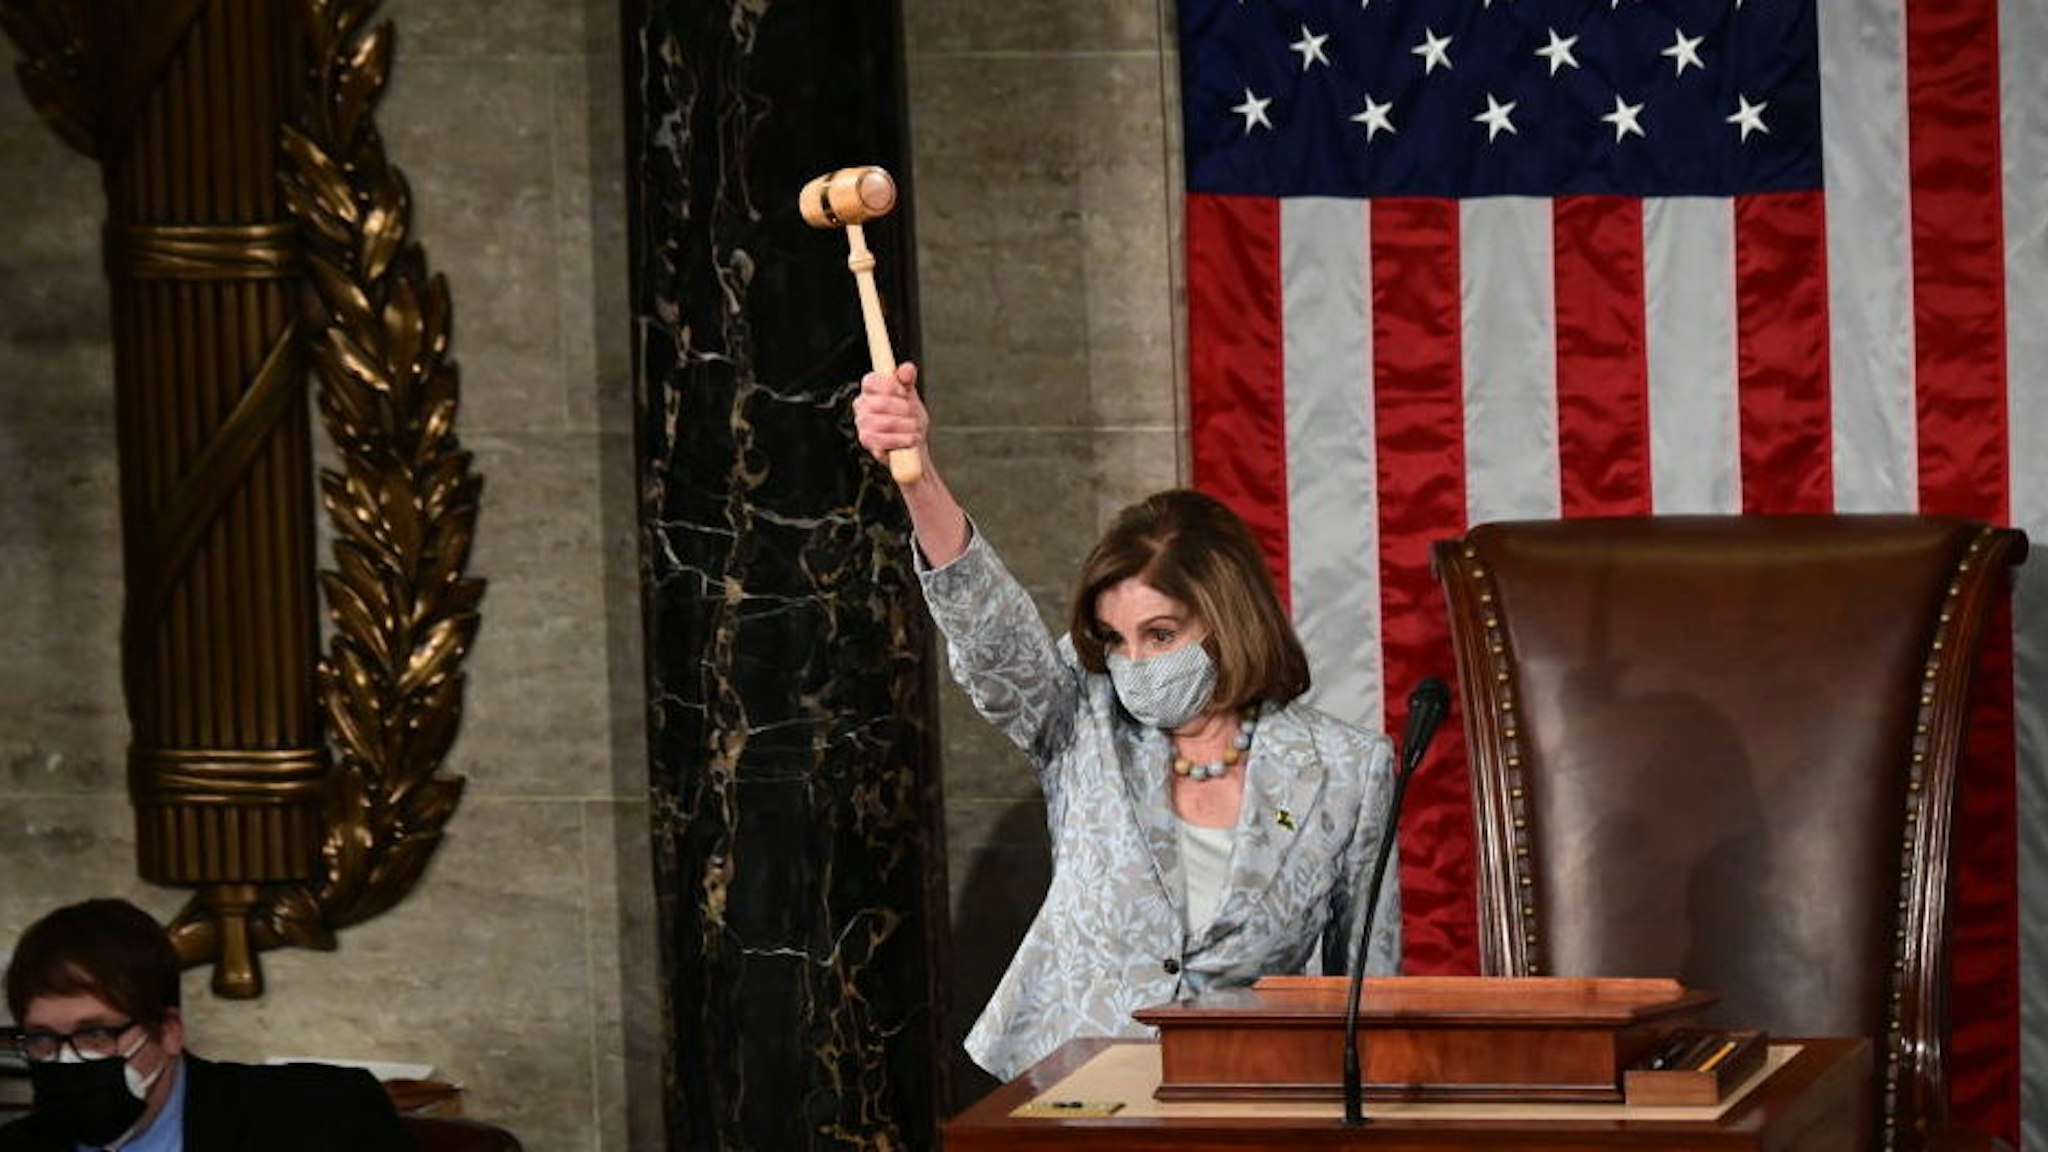 WASHINGTON, DC - JANUARY 03: U.S. House Speaker Nancy Pelosi (D-CA) presides over the year's opening session on January 3, 2021 in Washington, DC. Both chambers are holding rare Sunday sessions to open the new Congress as the Constitution requires.